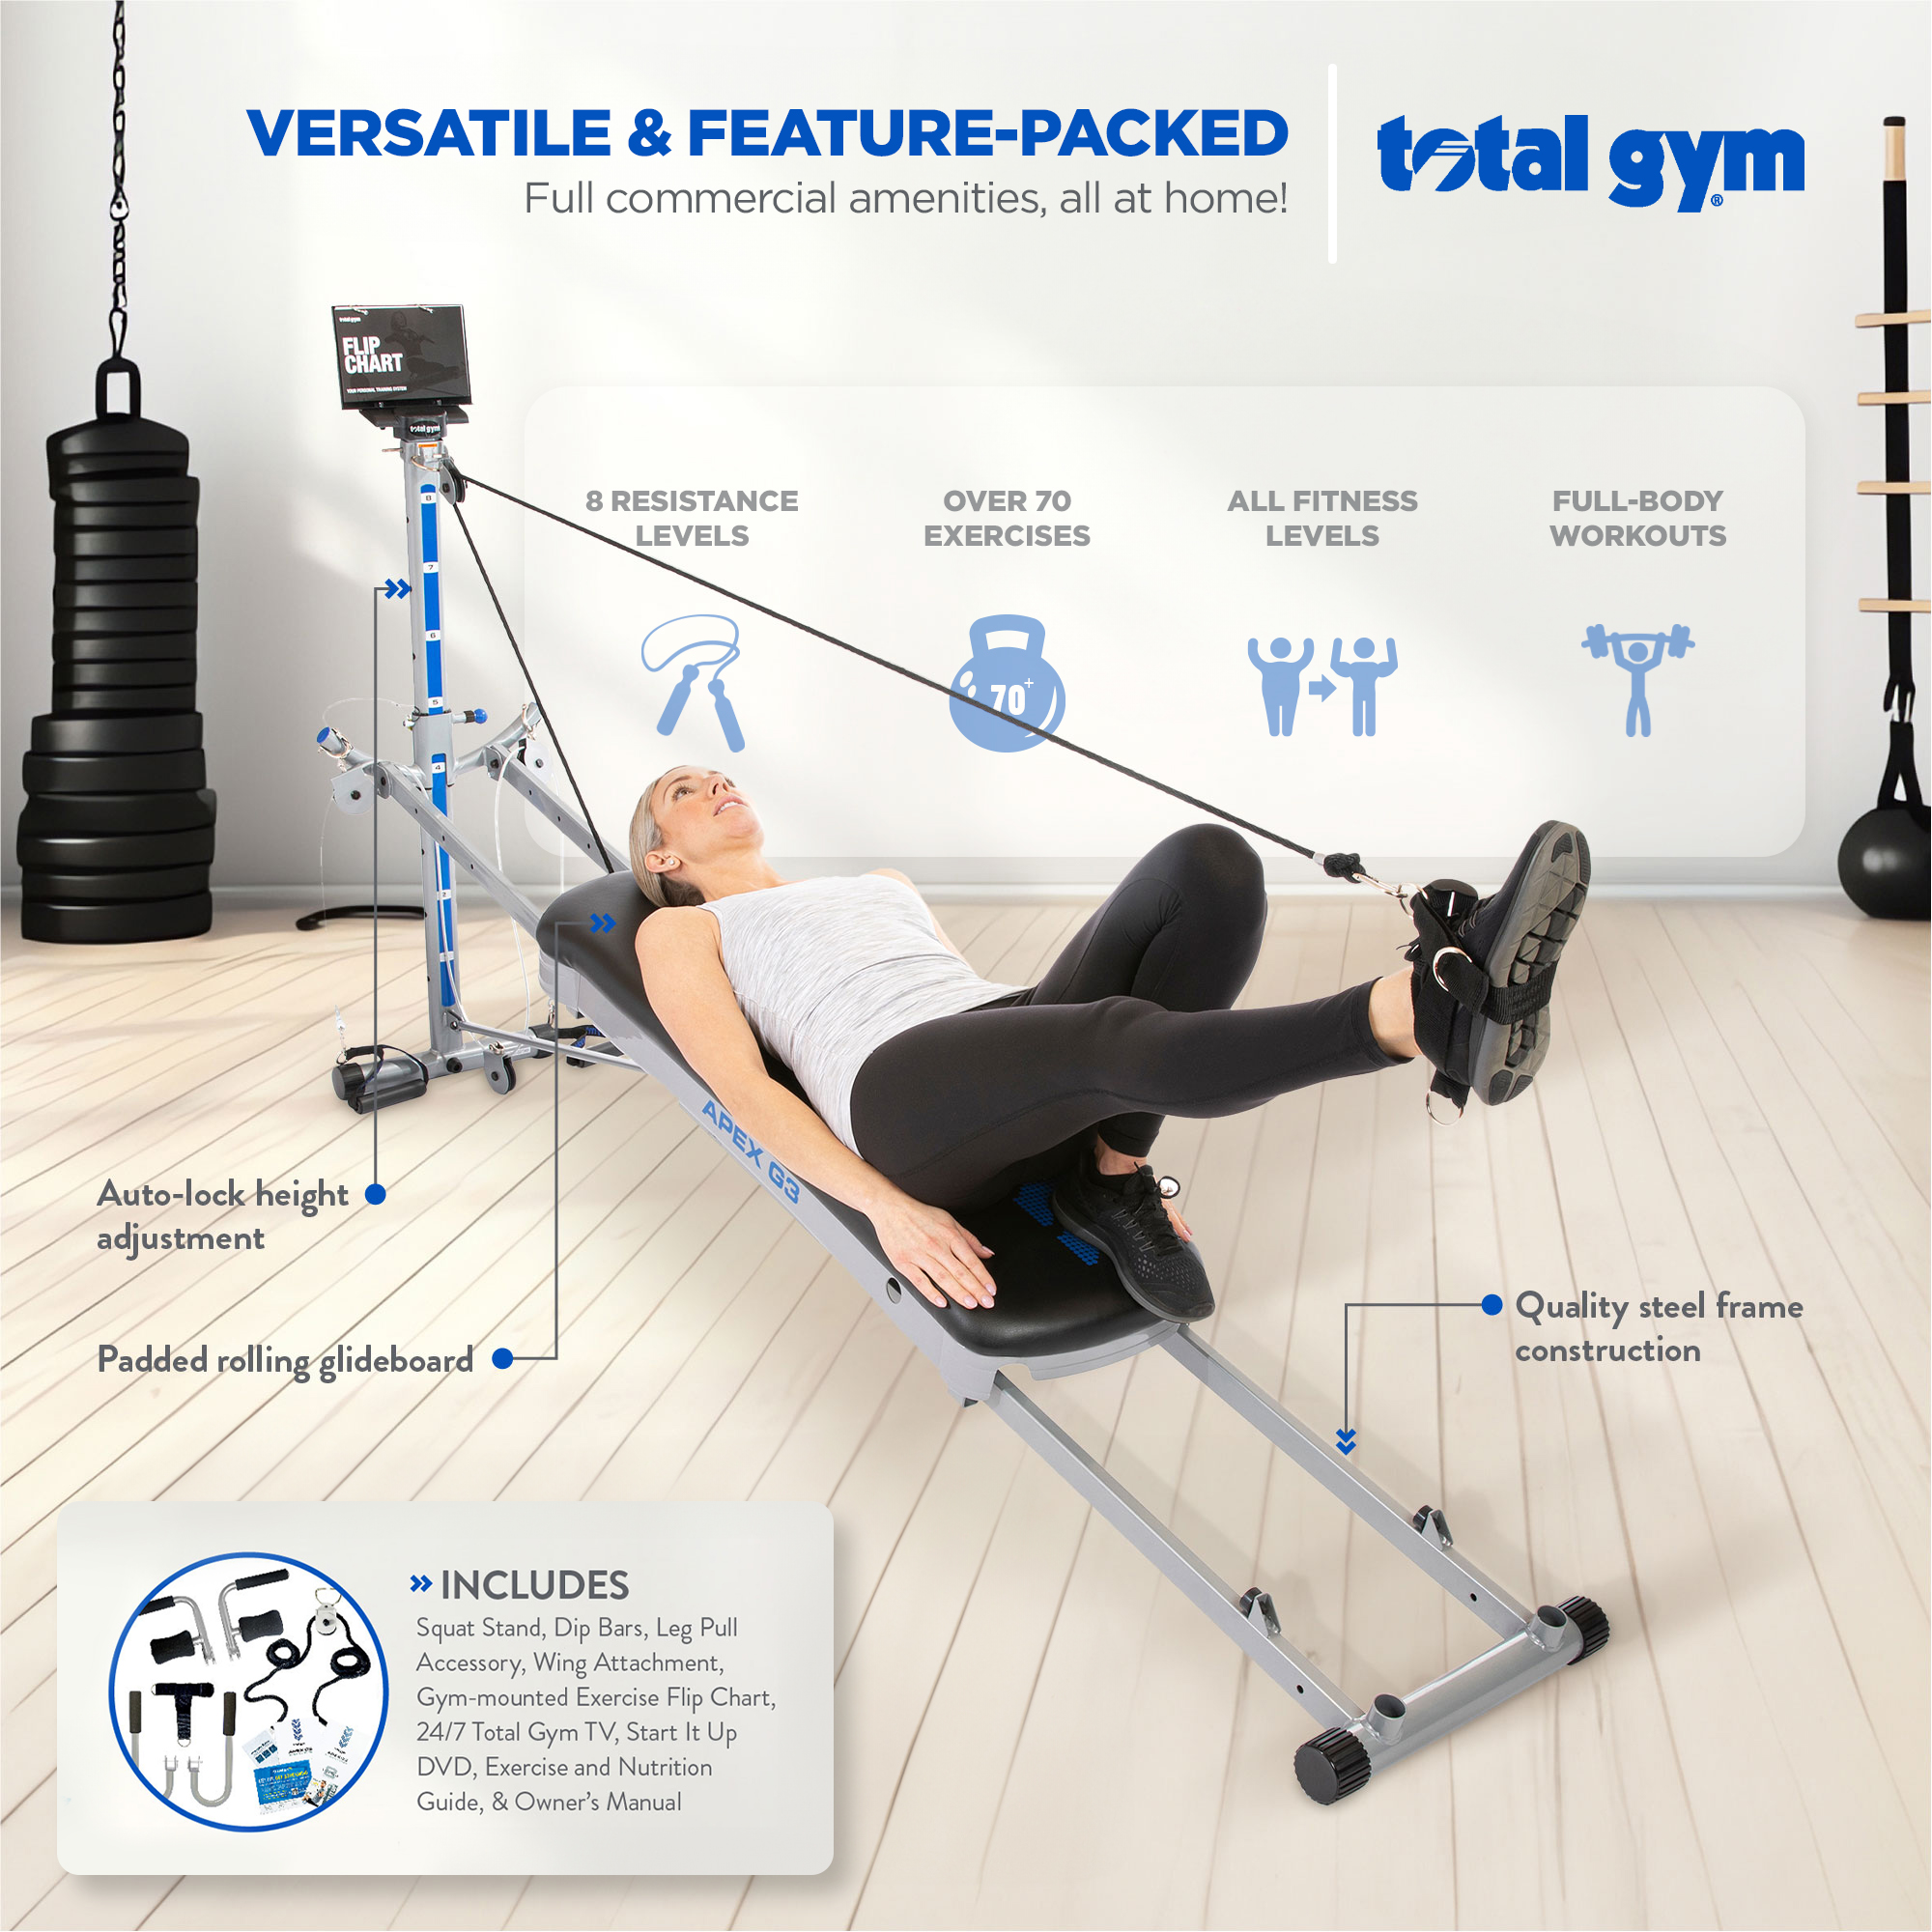 Total Gym APEX G3 Fitness Incline Weight Trainer with 8 Resistance Levels - image 2 of 11